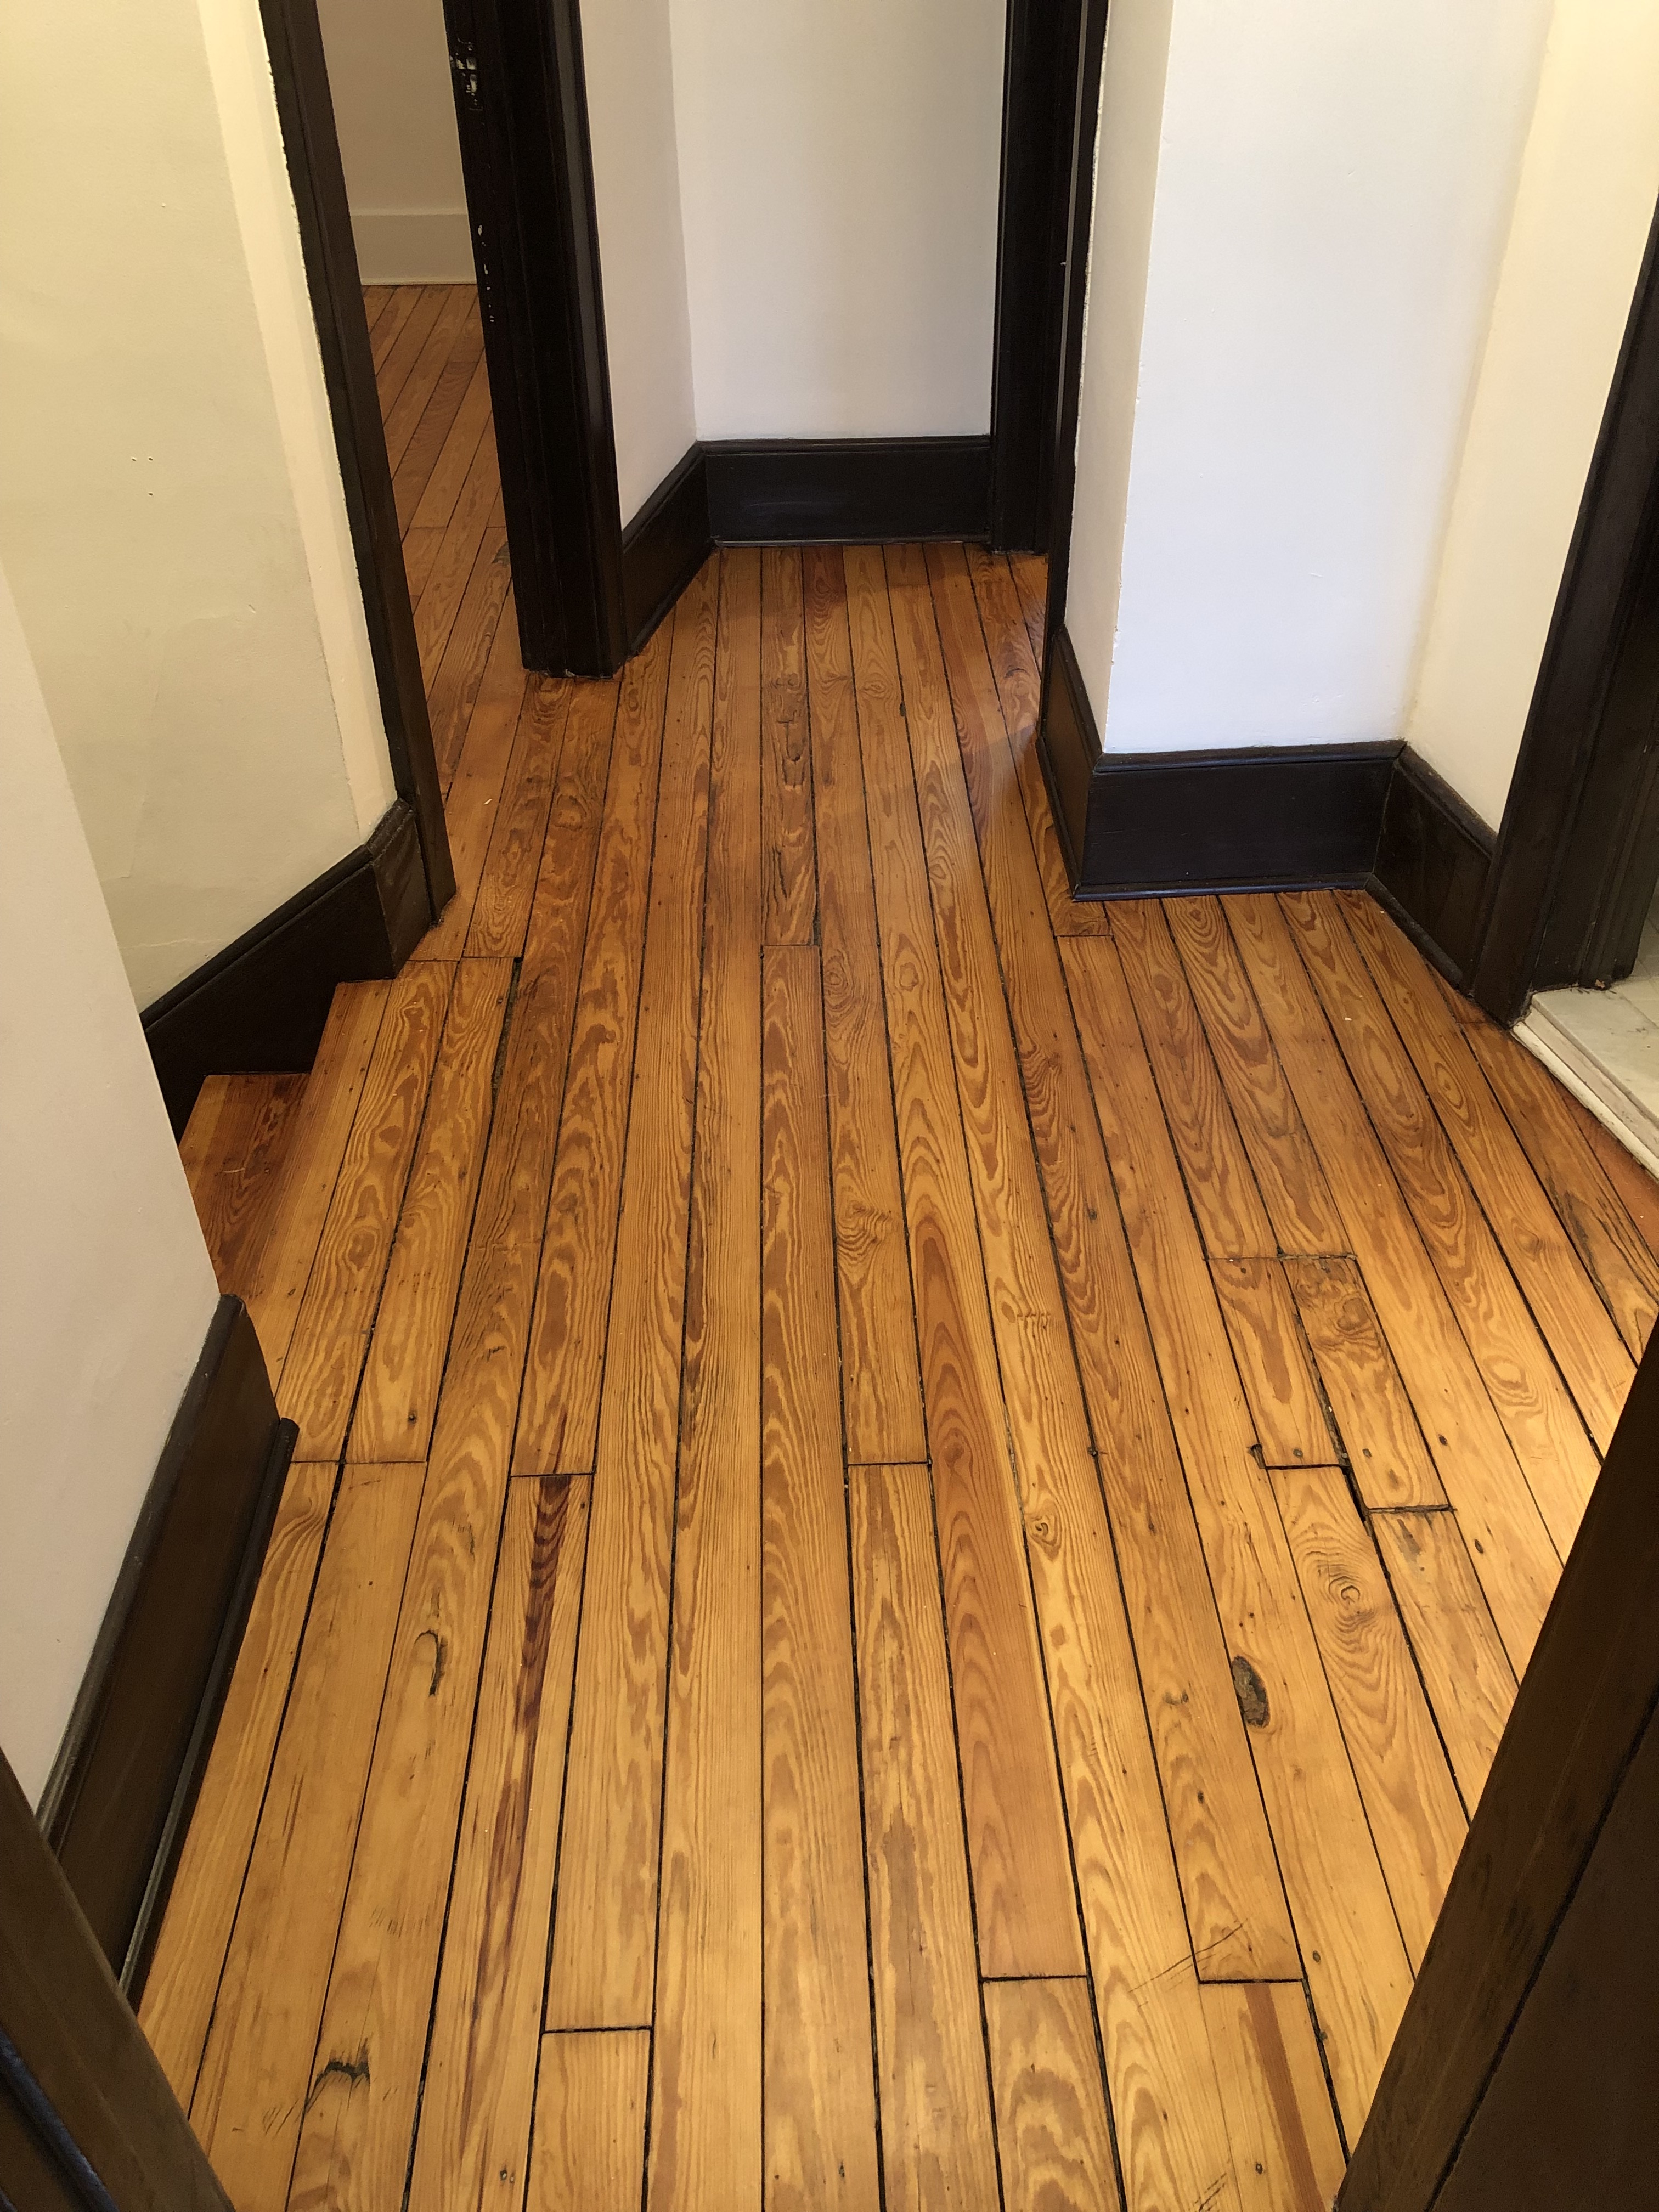 How To Refinish Hardwood Floors Step, Steps To Refinish Hardwood Floors